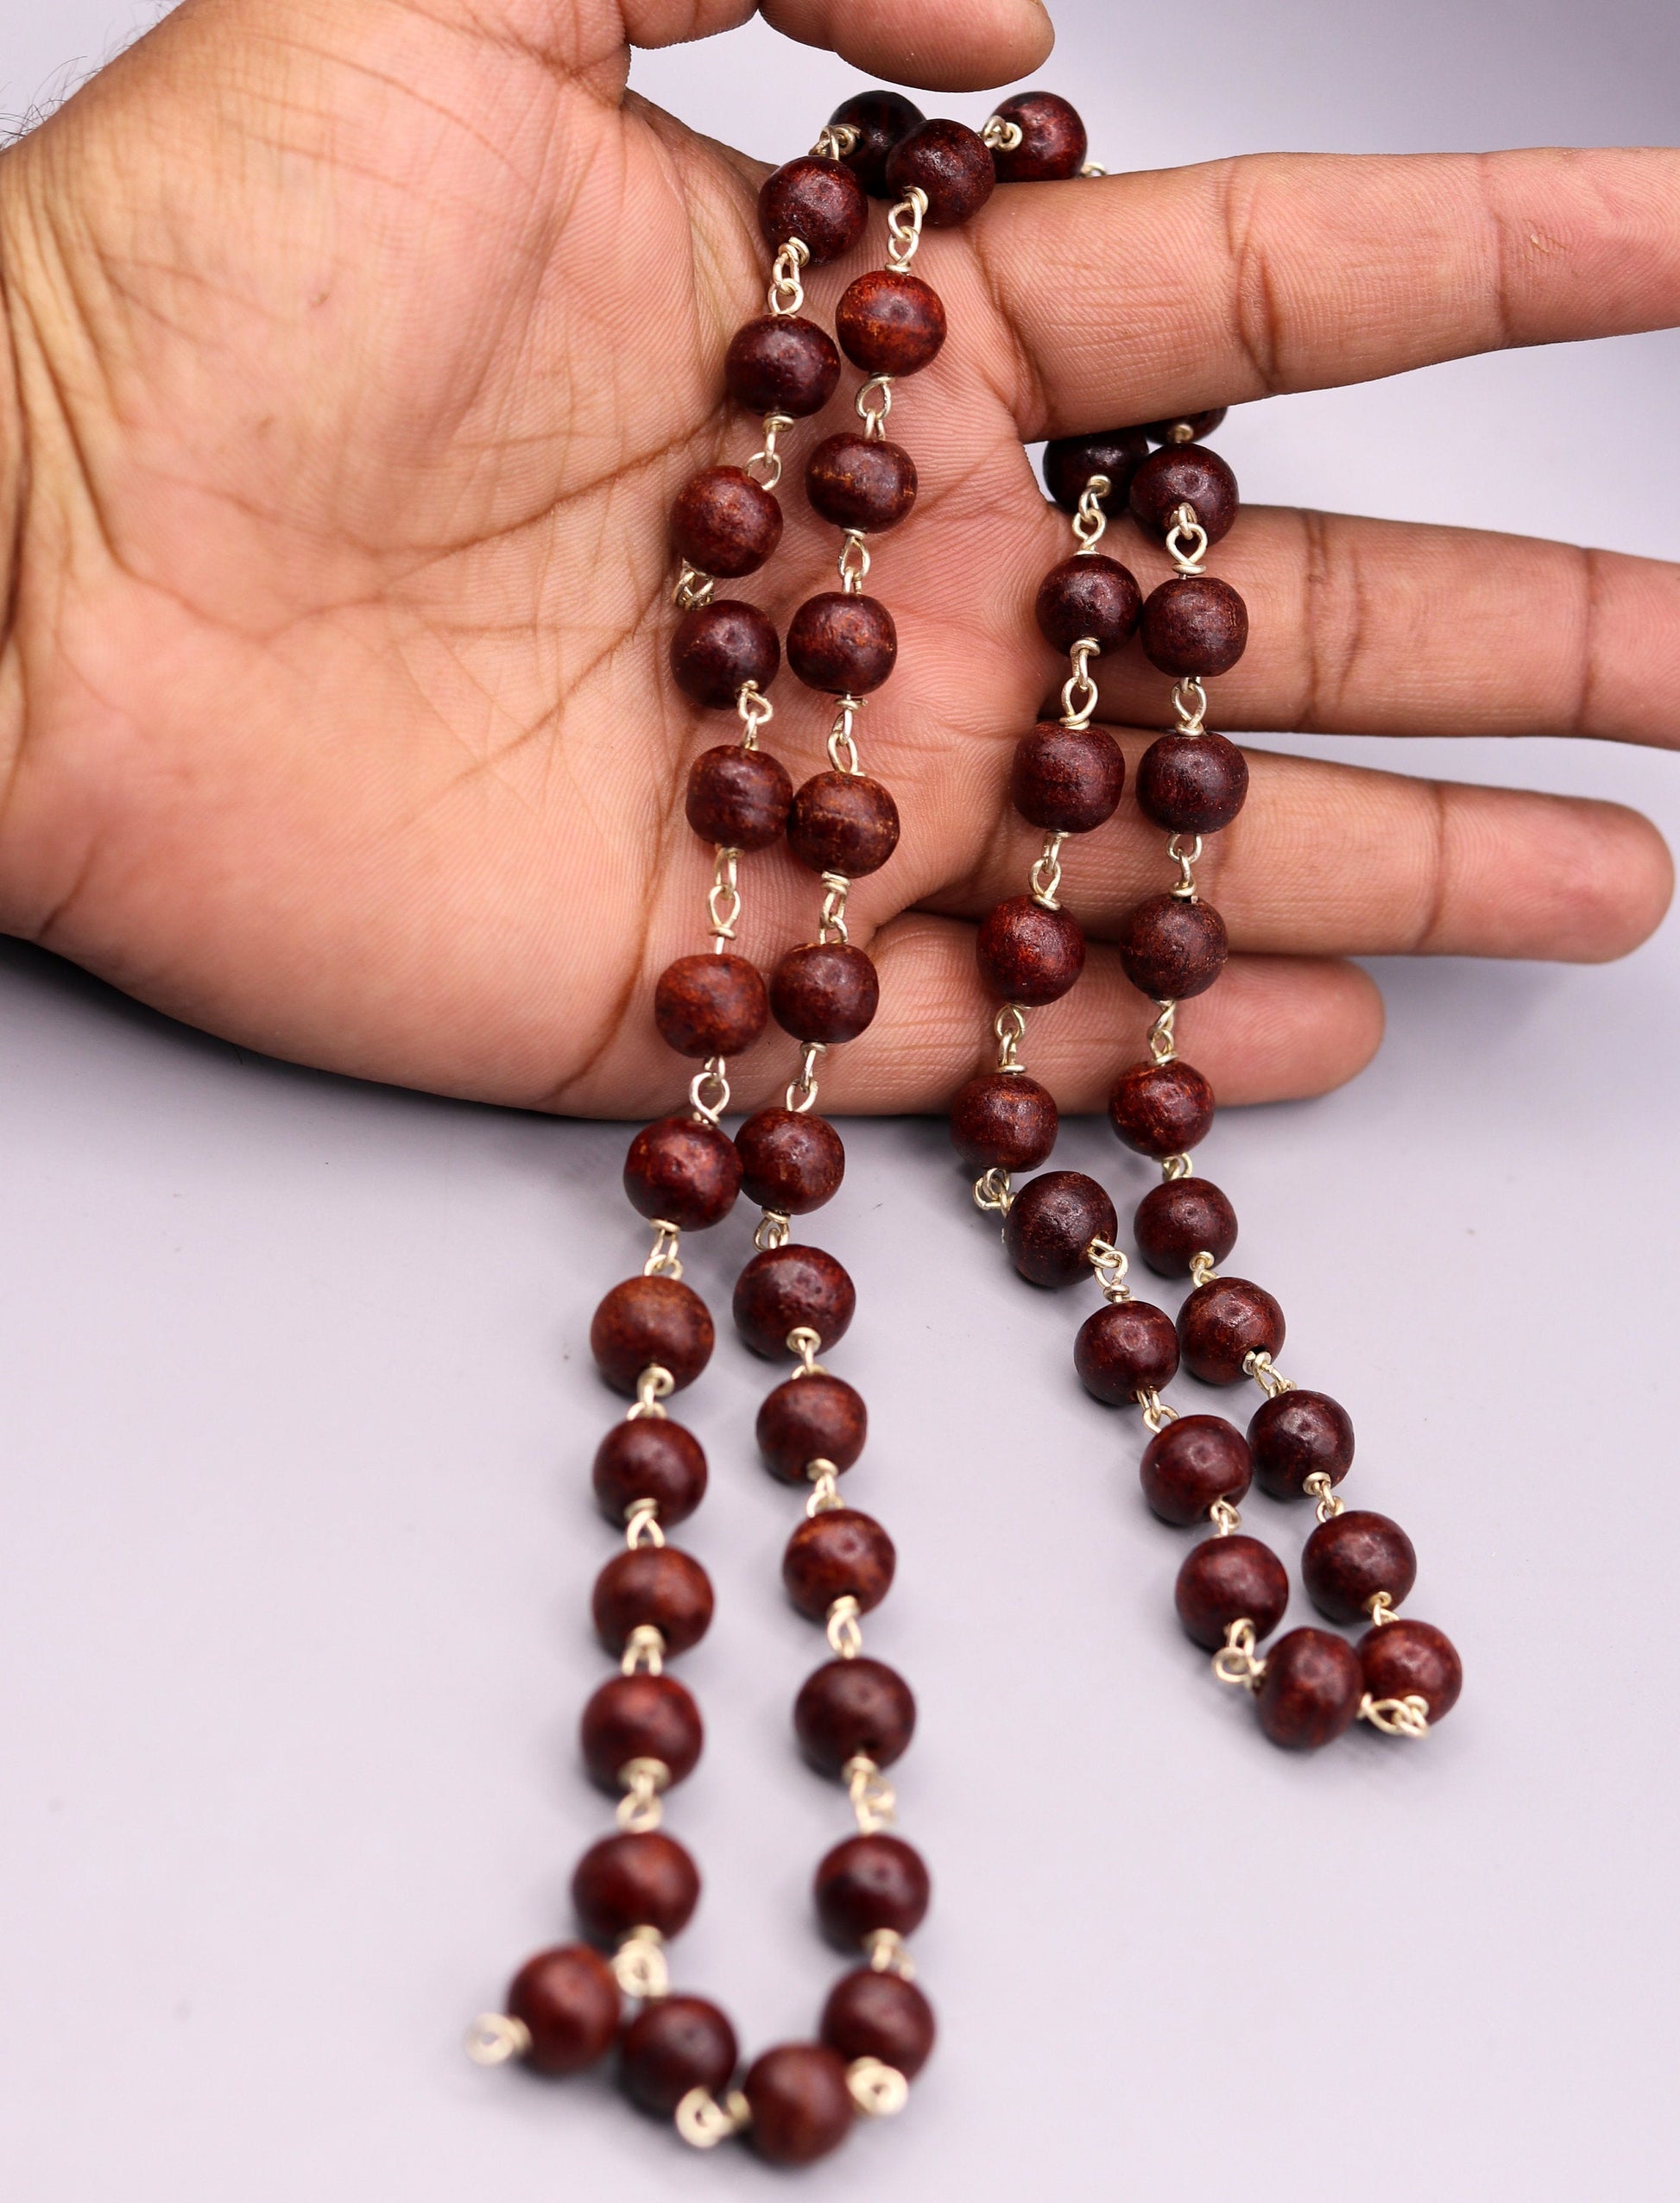 925 Solid silver red Sandal wood beads jaap mala handcrafted 54 beads jaap mala necklace chain use for medical india jewelry ch26 - TRIBAL ORNAMENTS